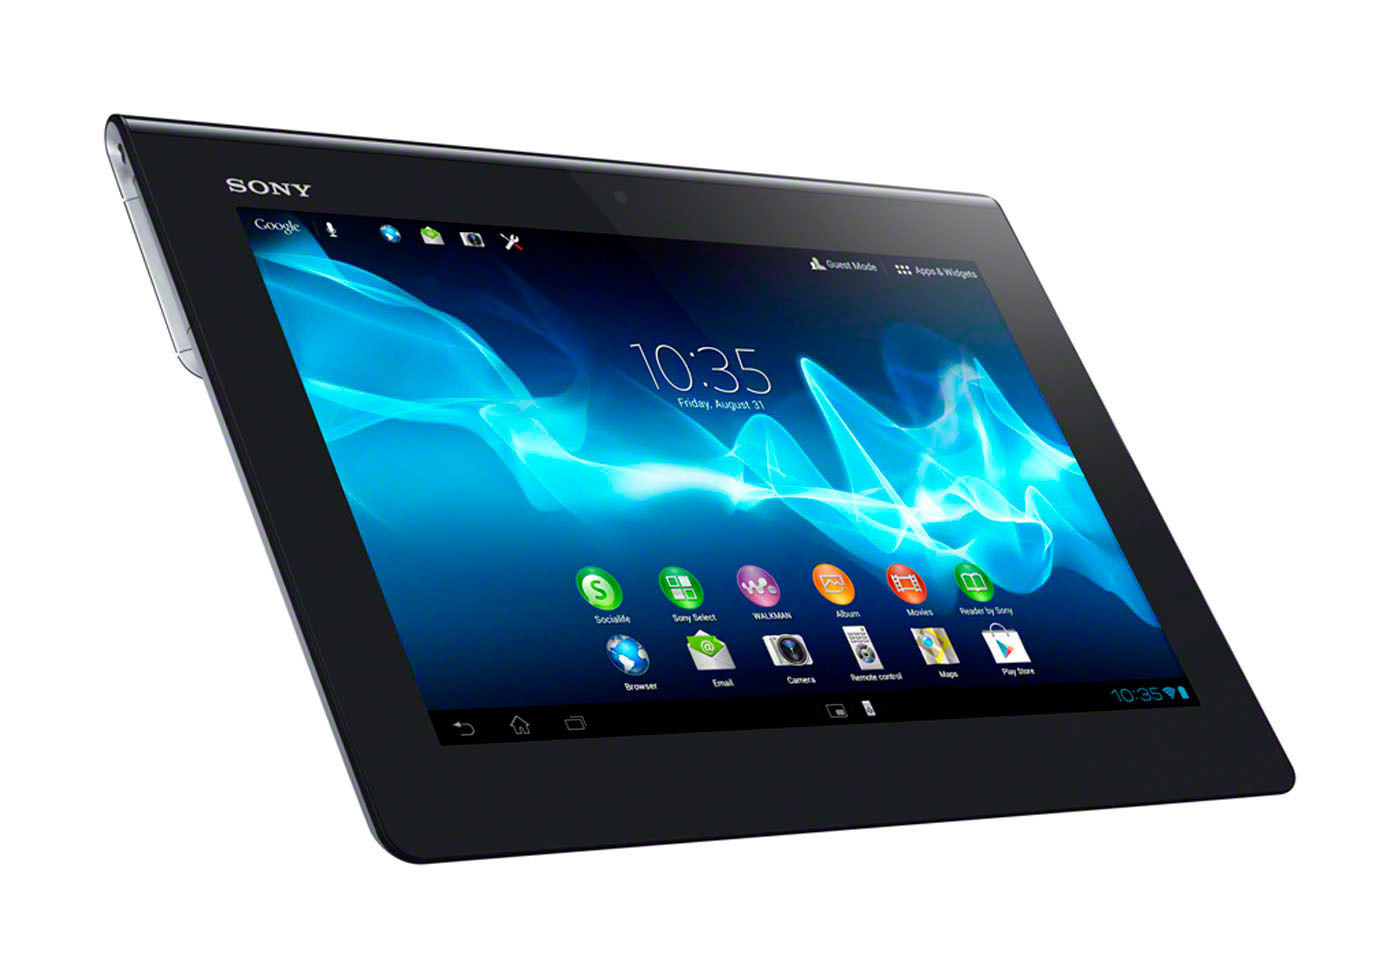 Sony Xperia Tablet S Getting Jelly Bean Update as of Now   Tablet News